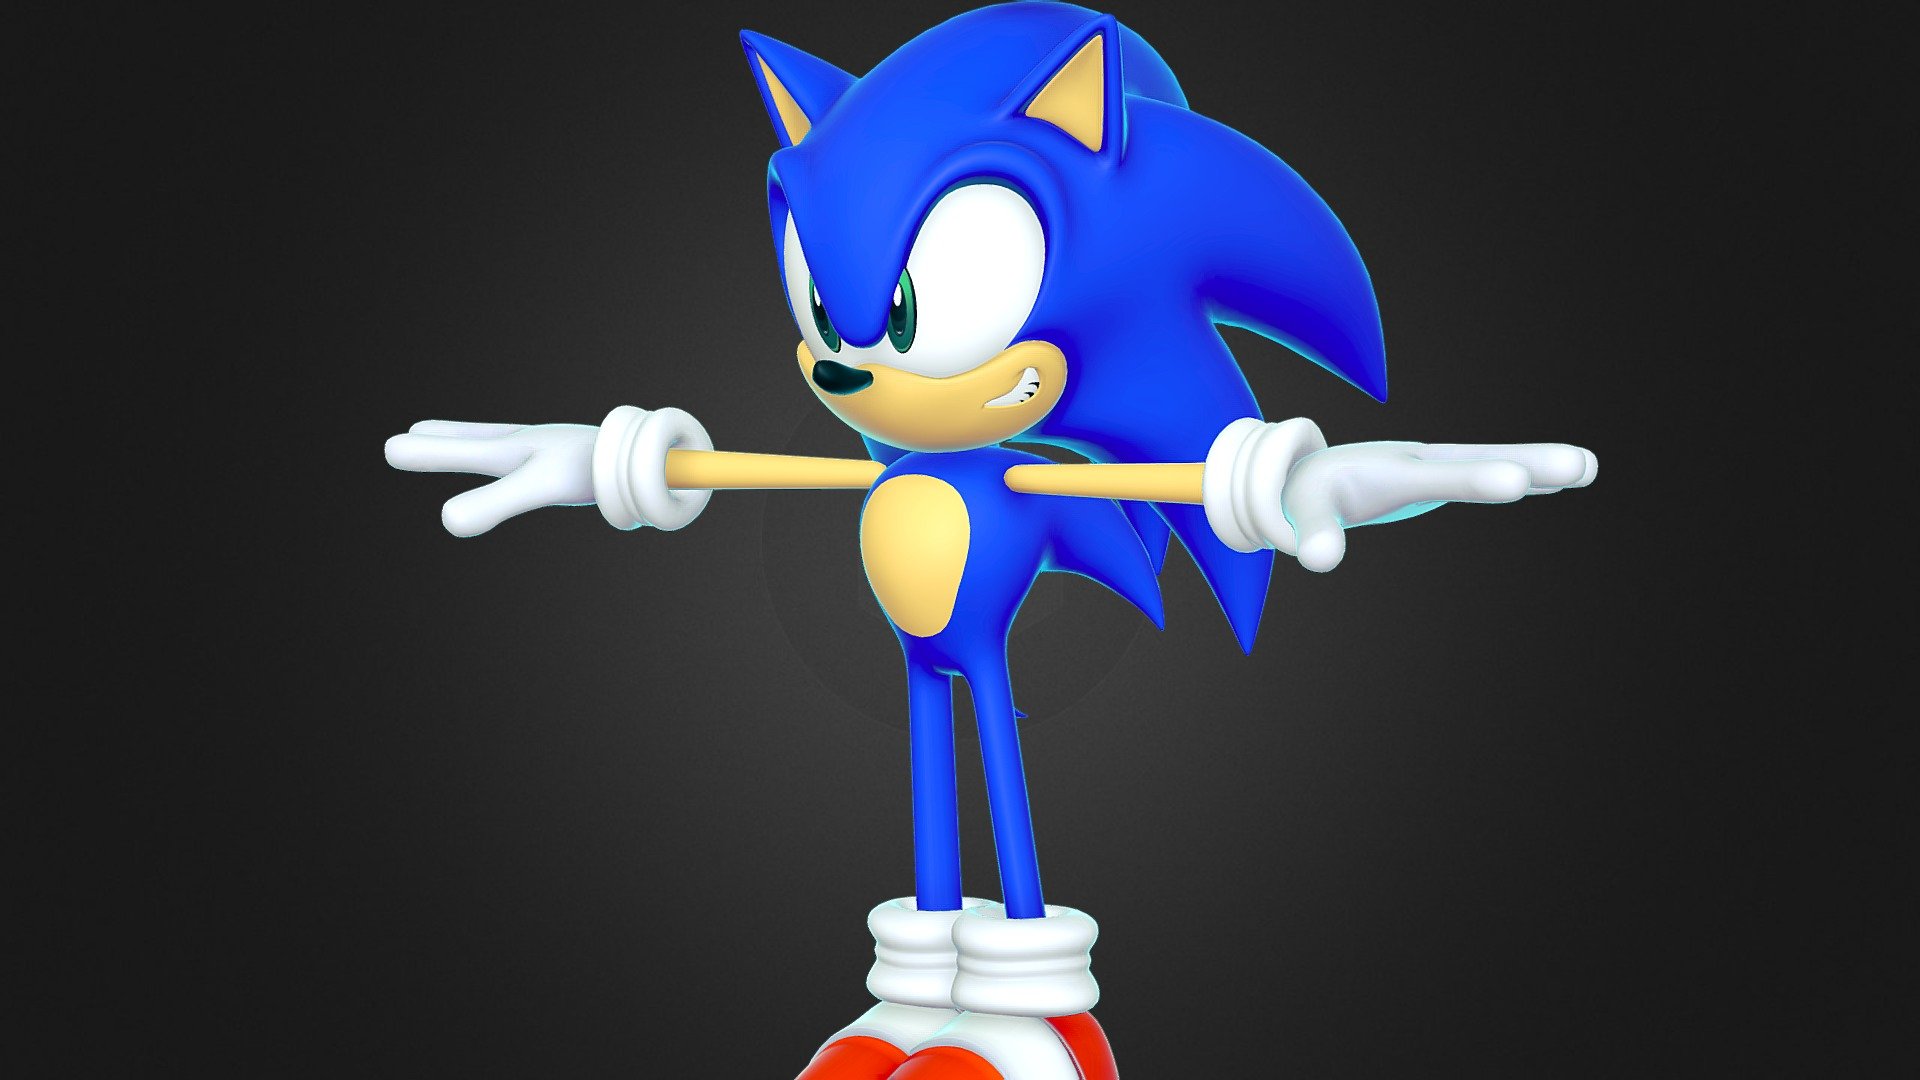 This model is based in the cgi sonic adventure 3d model